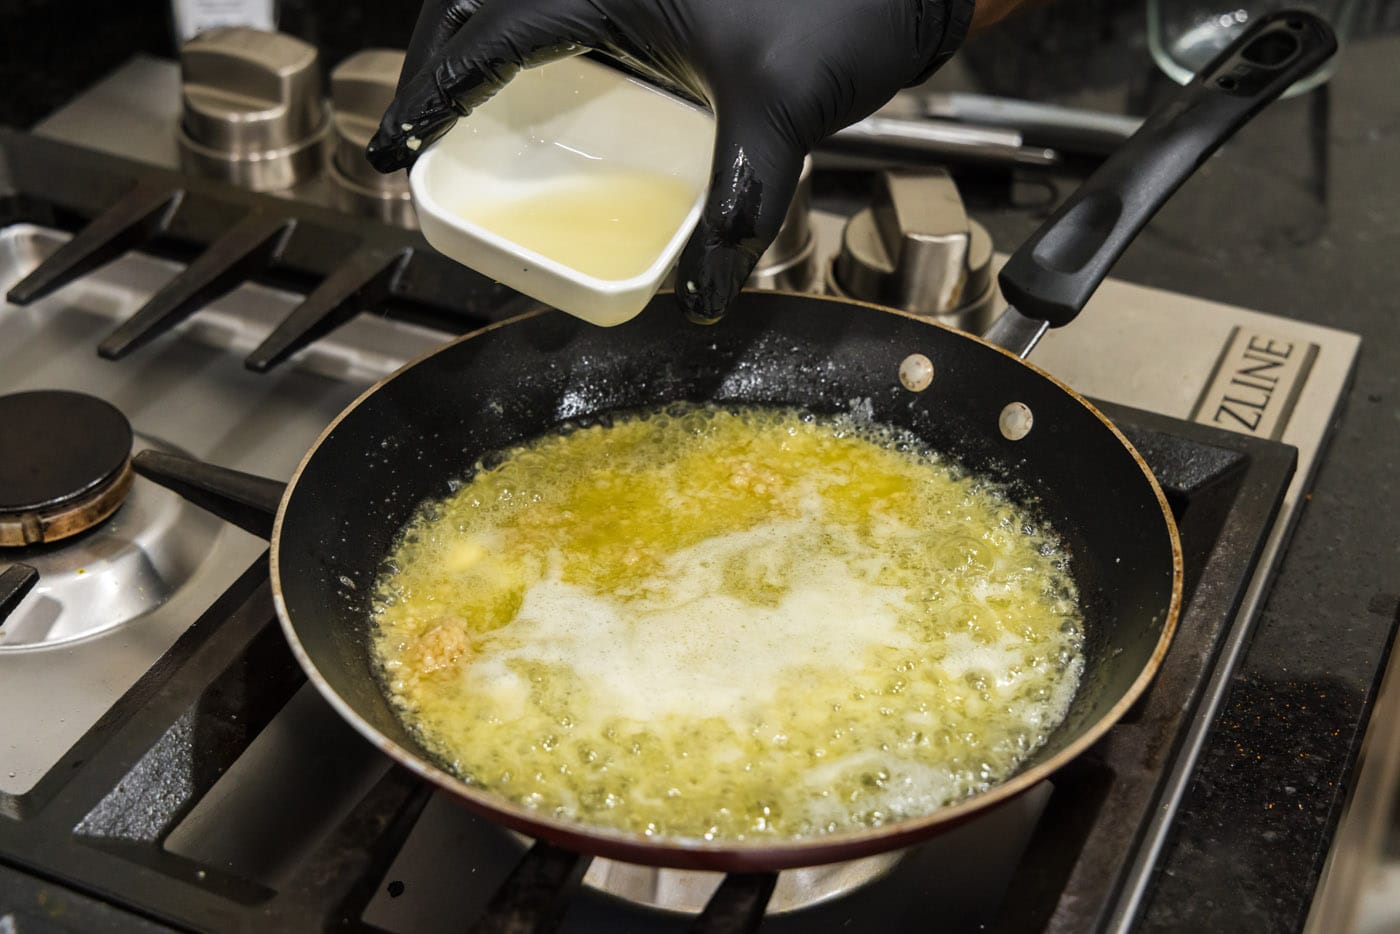 pouring lemon juice into melted butter and garlic mixture